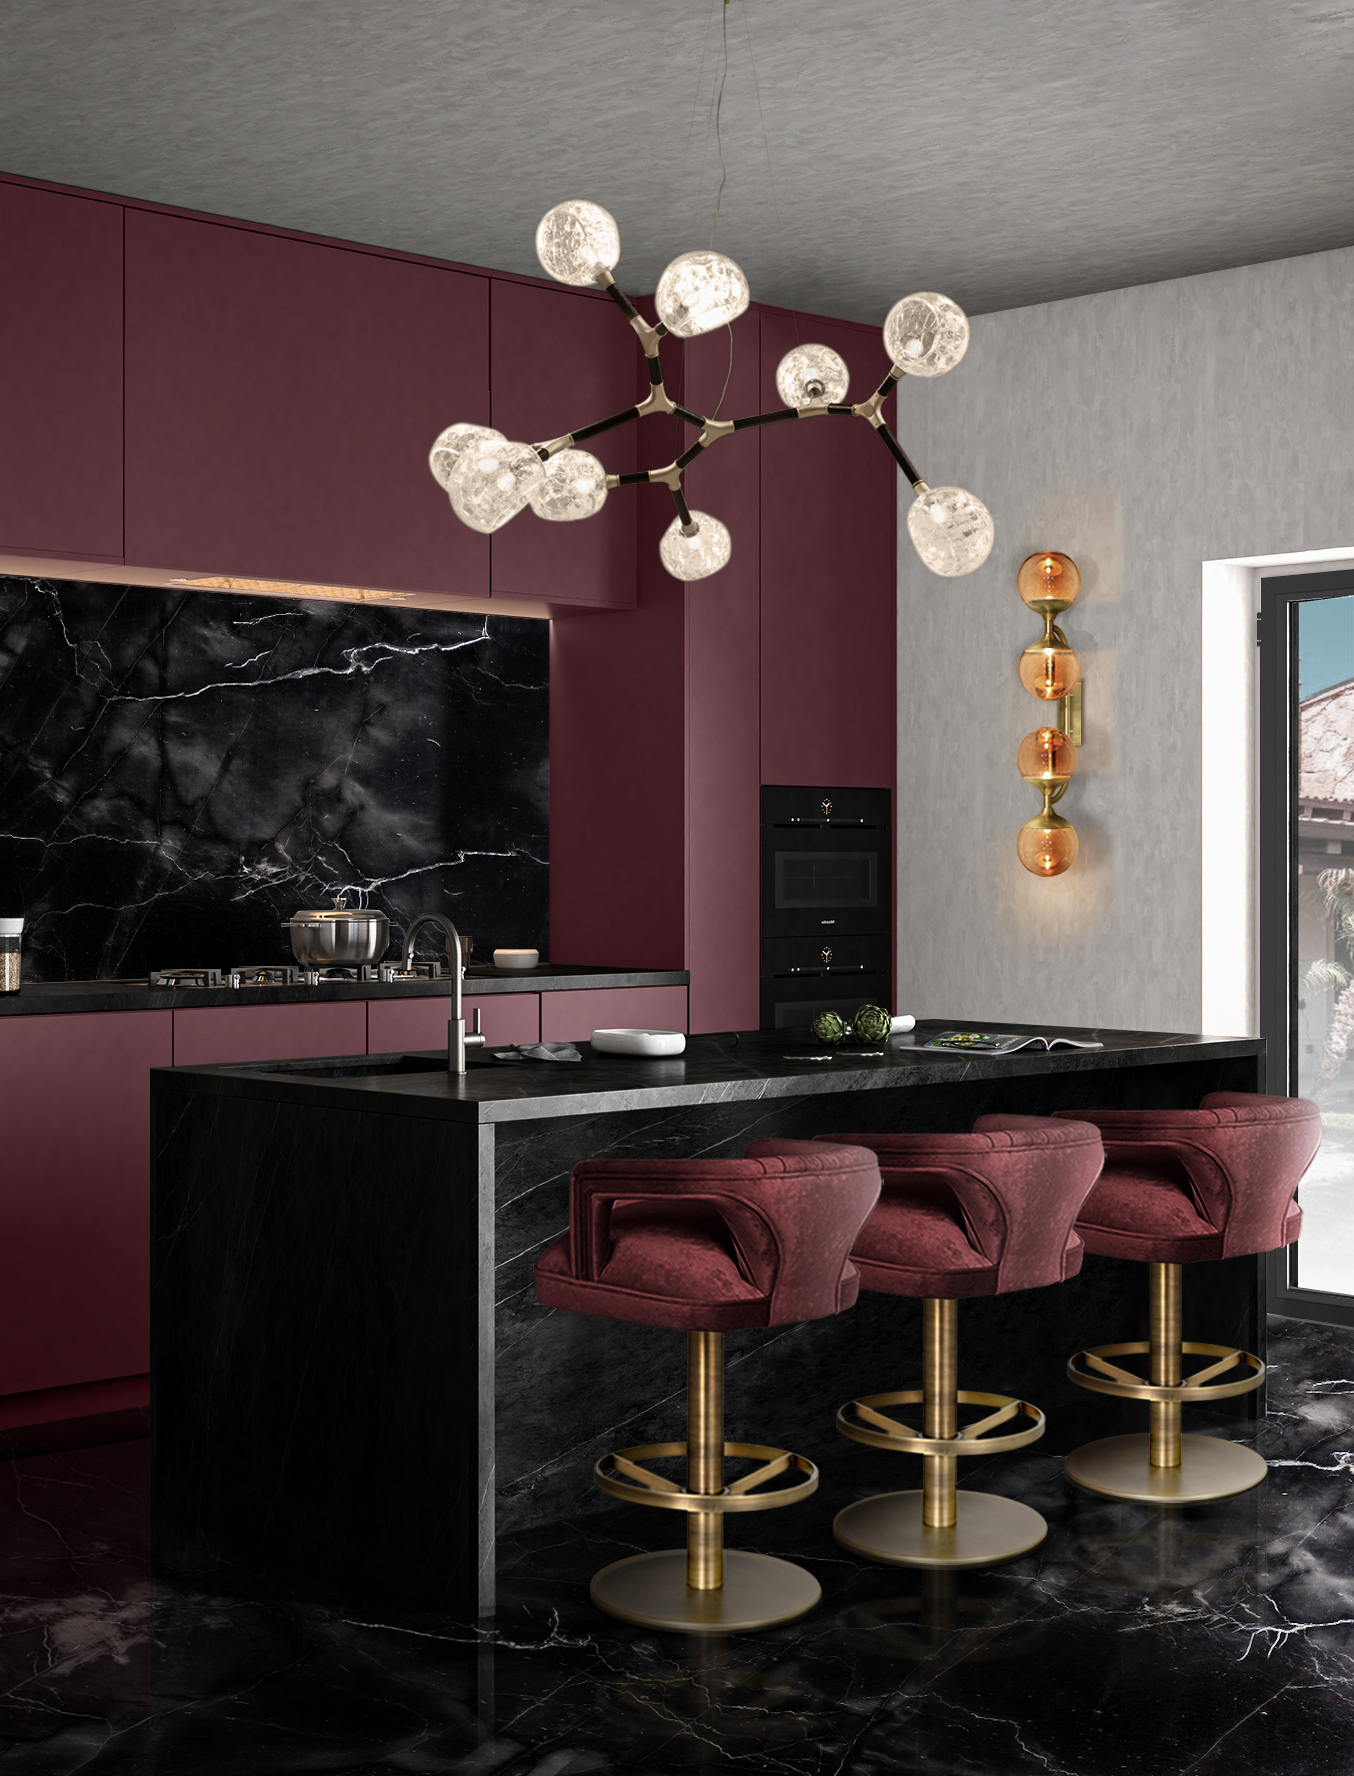 Kitchen Design in Maroon Tones - Home'Society